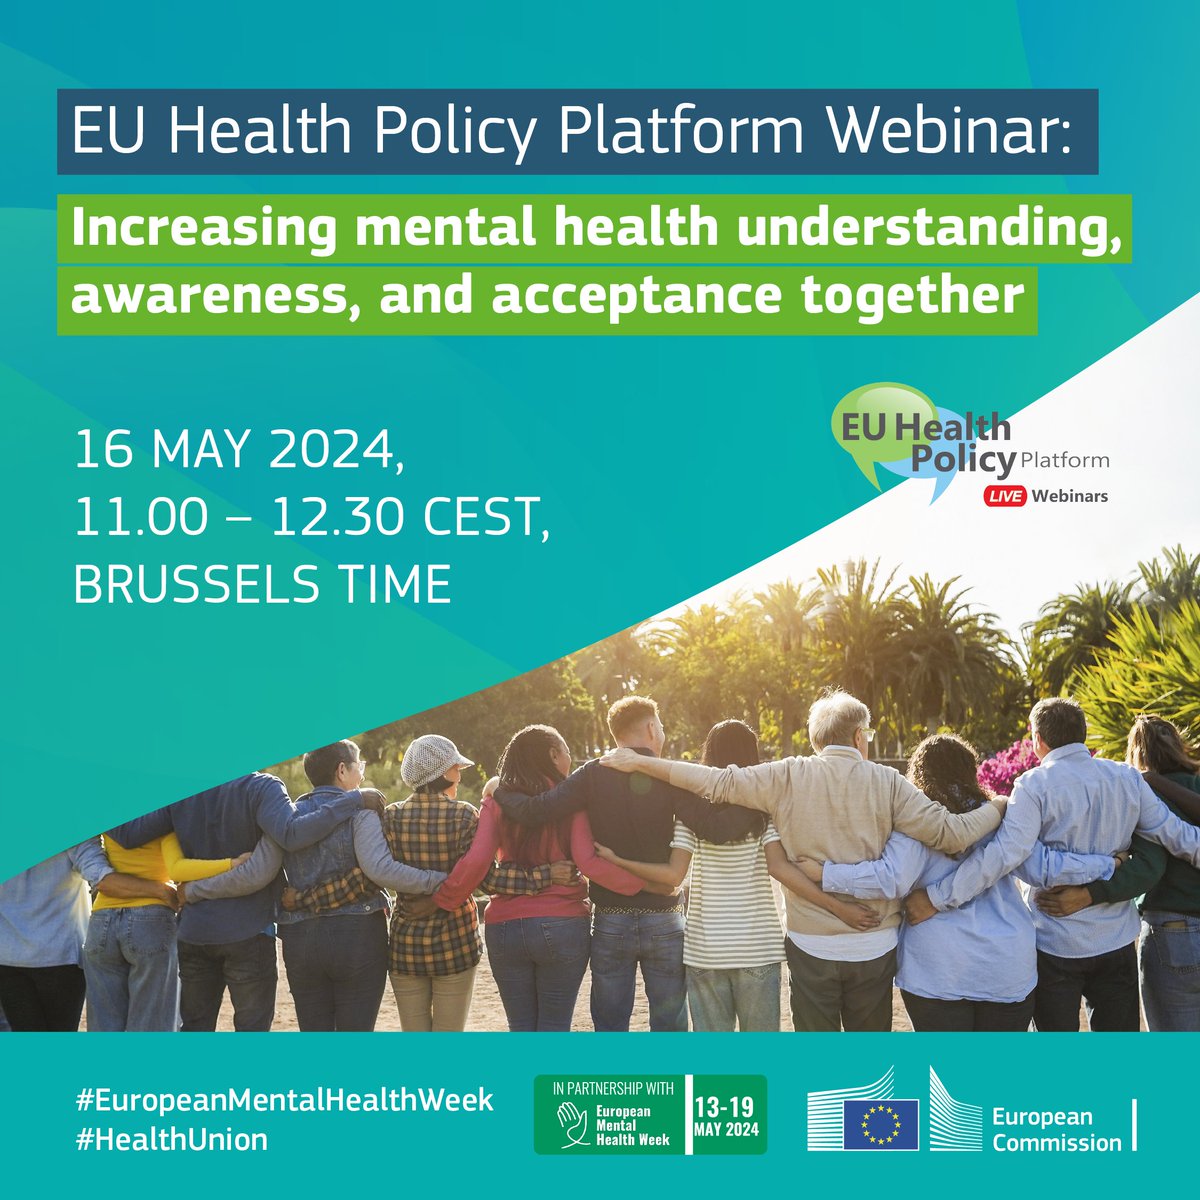 It's ok not to be ok. 
🧠To mark the #EuropeanMentalHealthWeek, we are hosting an #EUHPP webinar to learn about the power of collaboration & co-creation when it comes to #mentalhealth.
Register here👉 europa.eu/!TCkxpV
#HealthUnion #BetterTogether